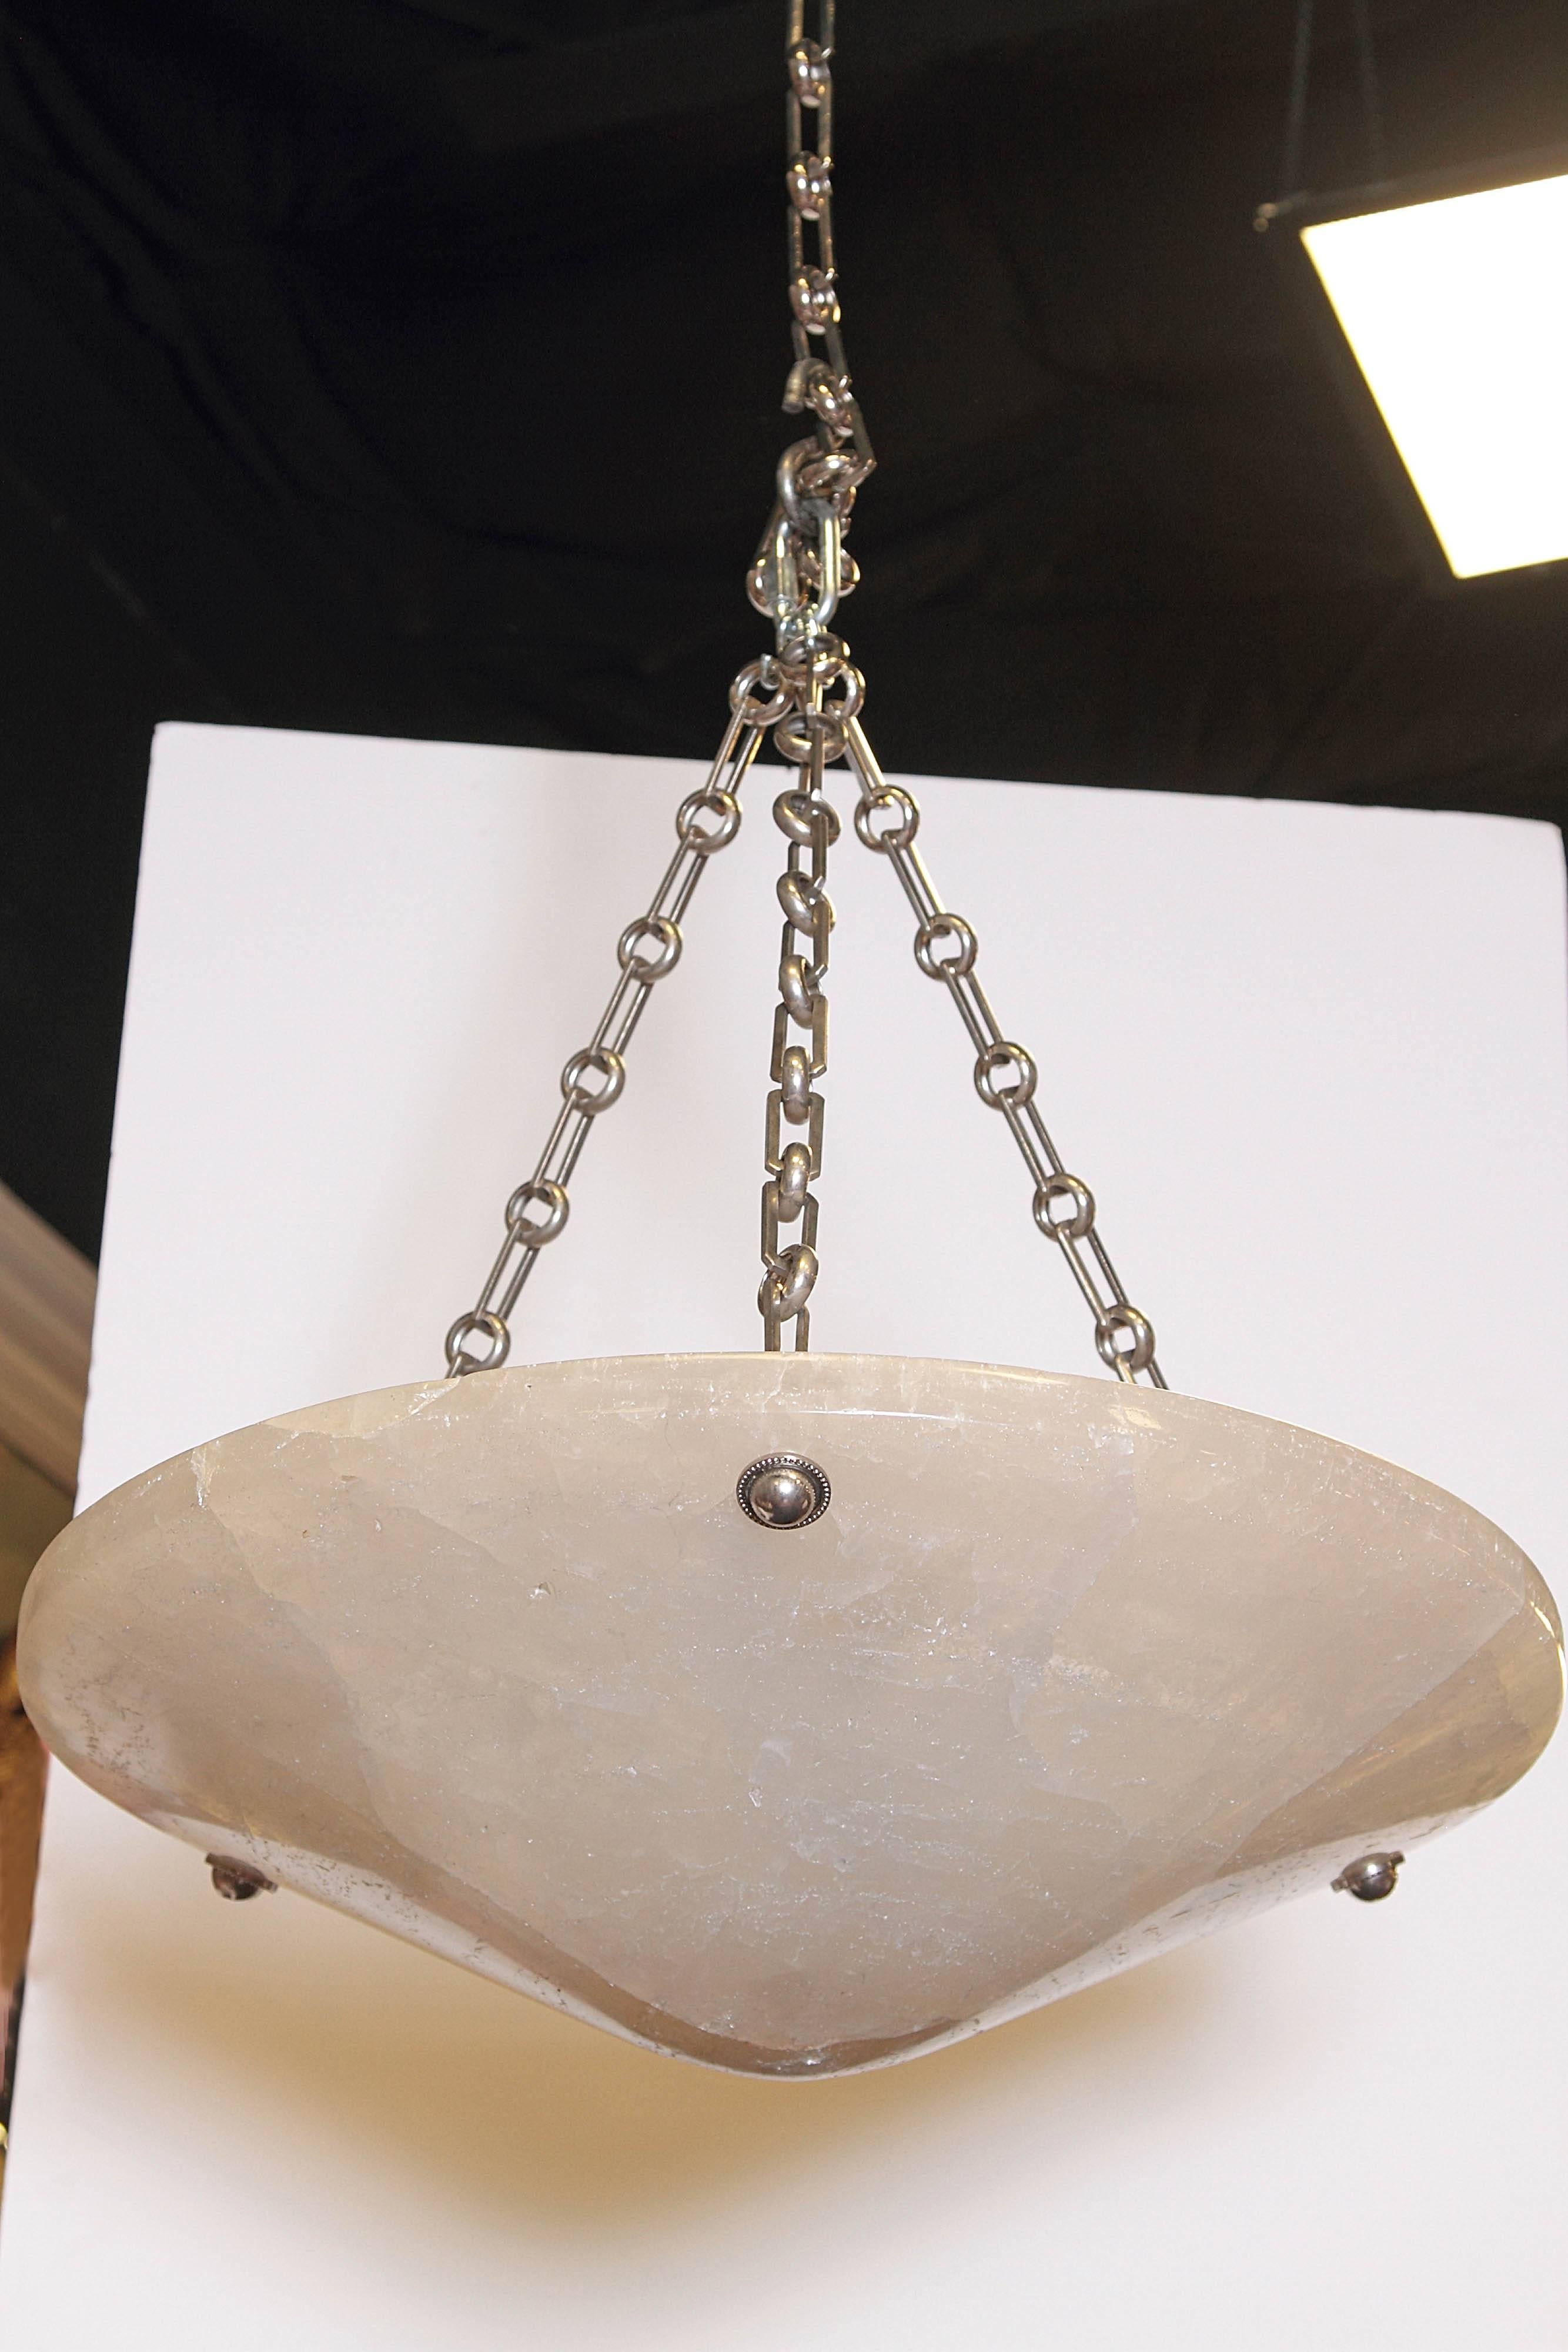 Chilean 20th Century Rock Crystal Hanging Bowl Chandelier